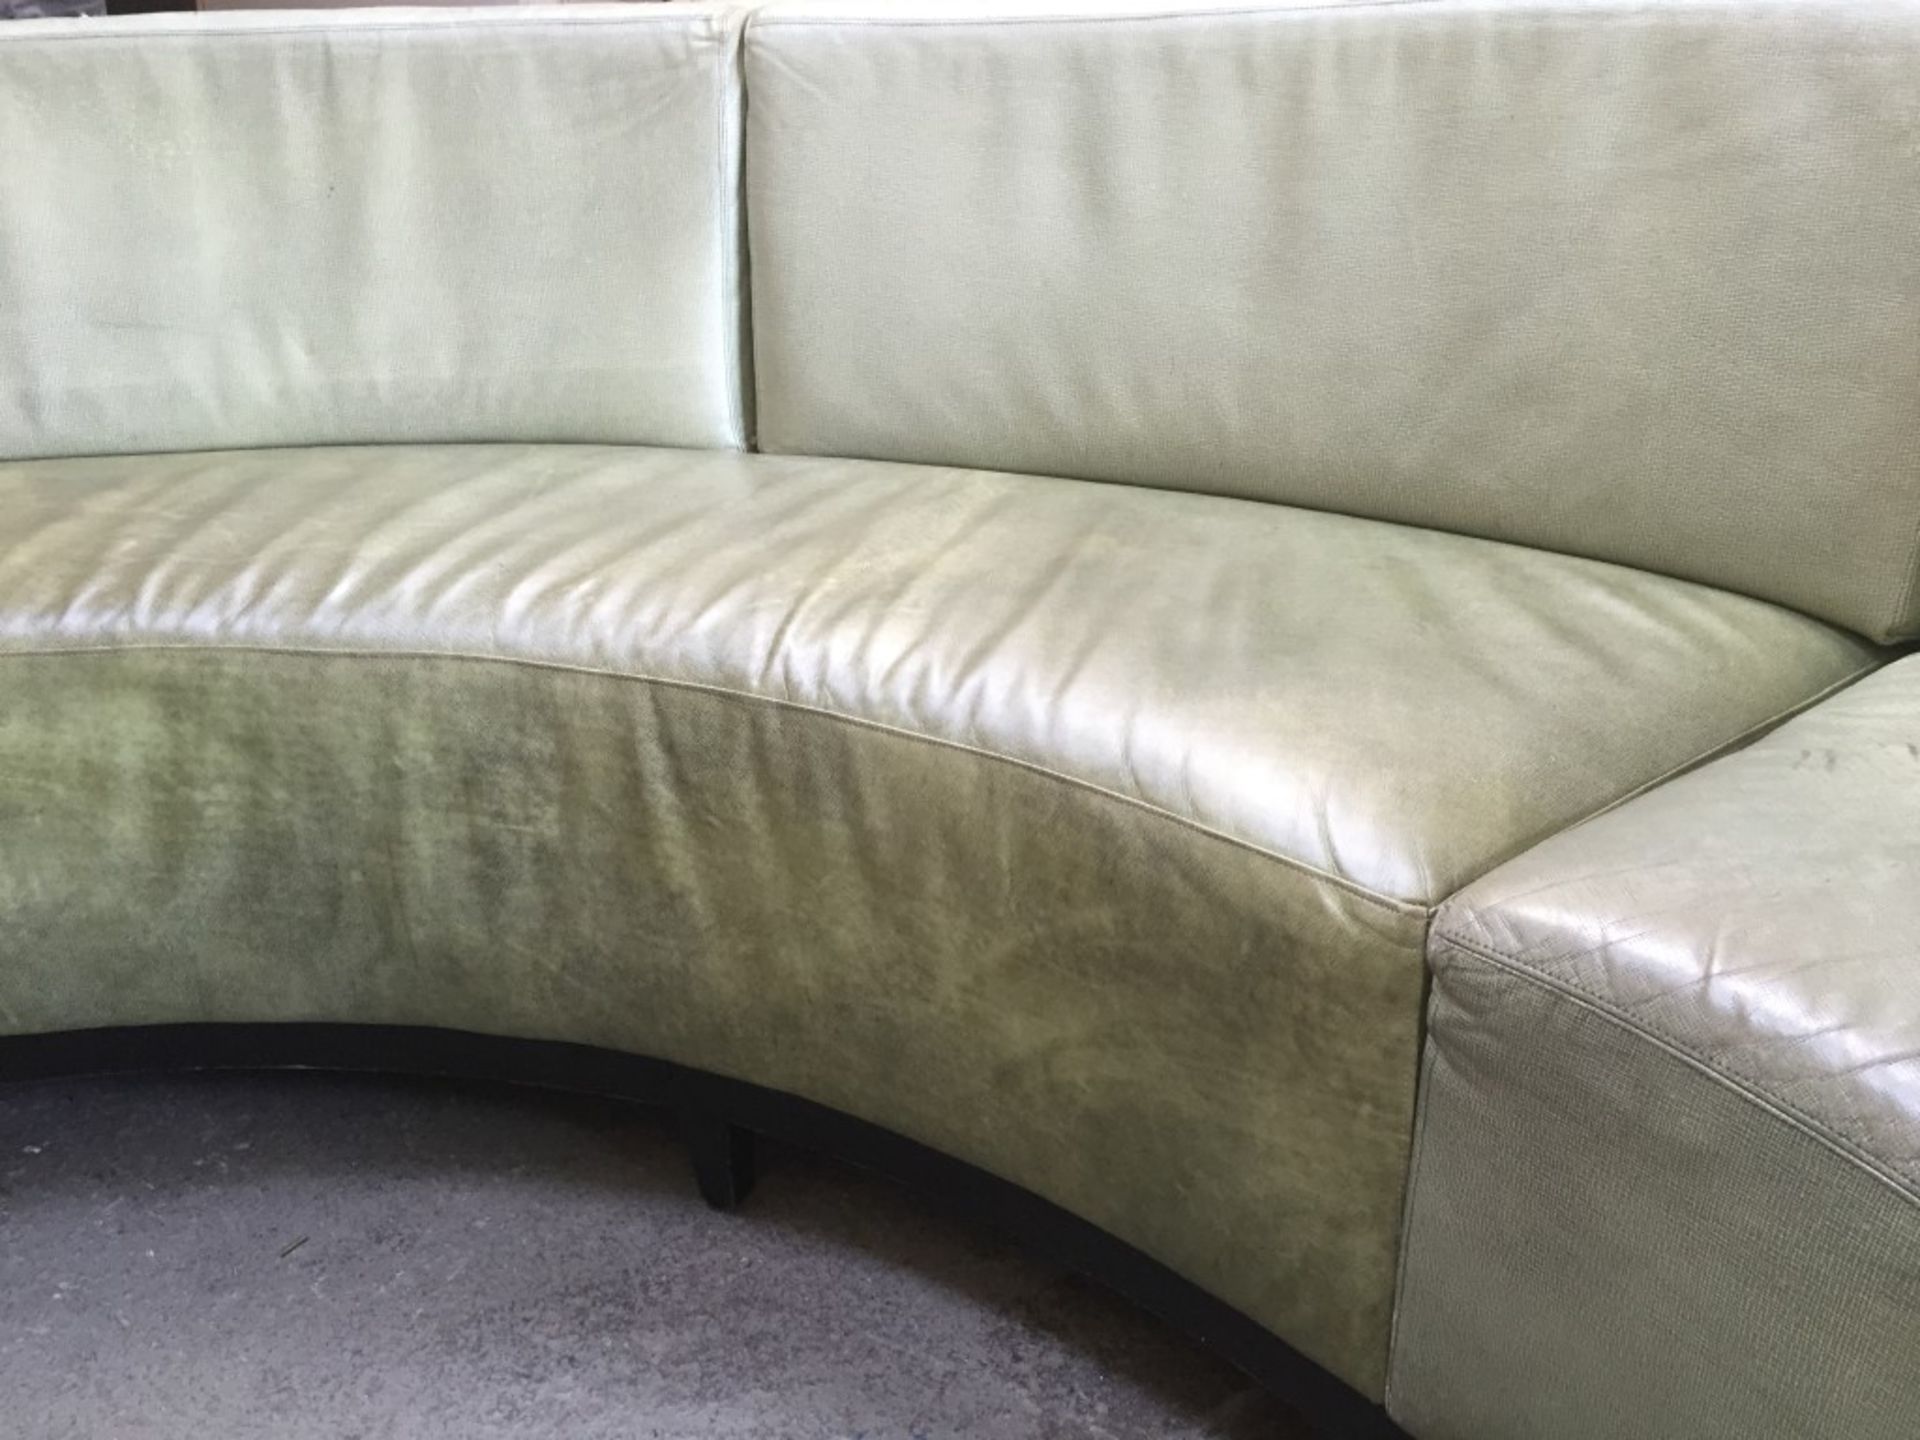 1 x Luxury Upholstered Curved Seating Area - Recently Removed From Nobu - Dimensions: W285 x D62cm x - Image 15 of 23